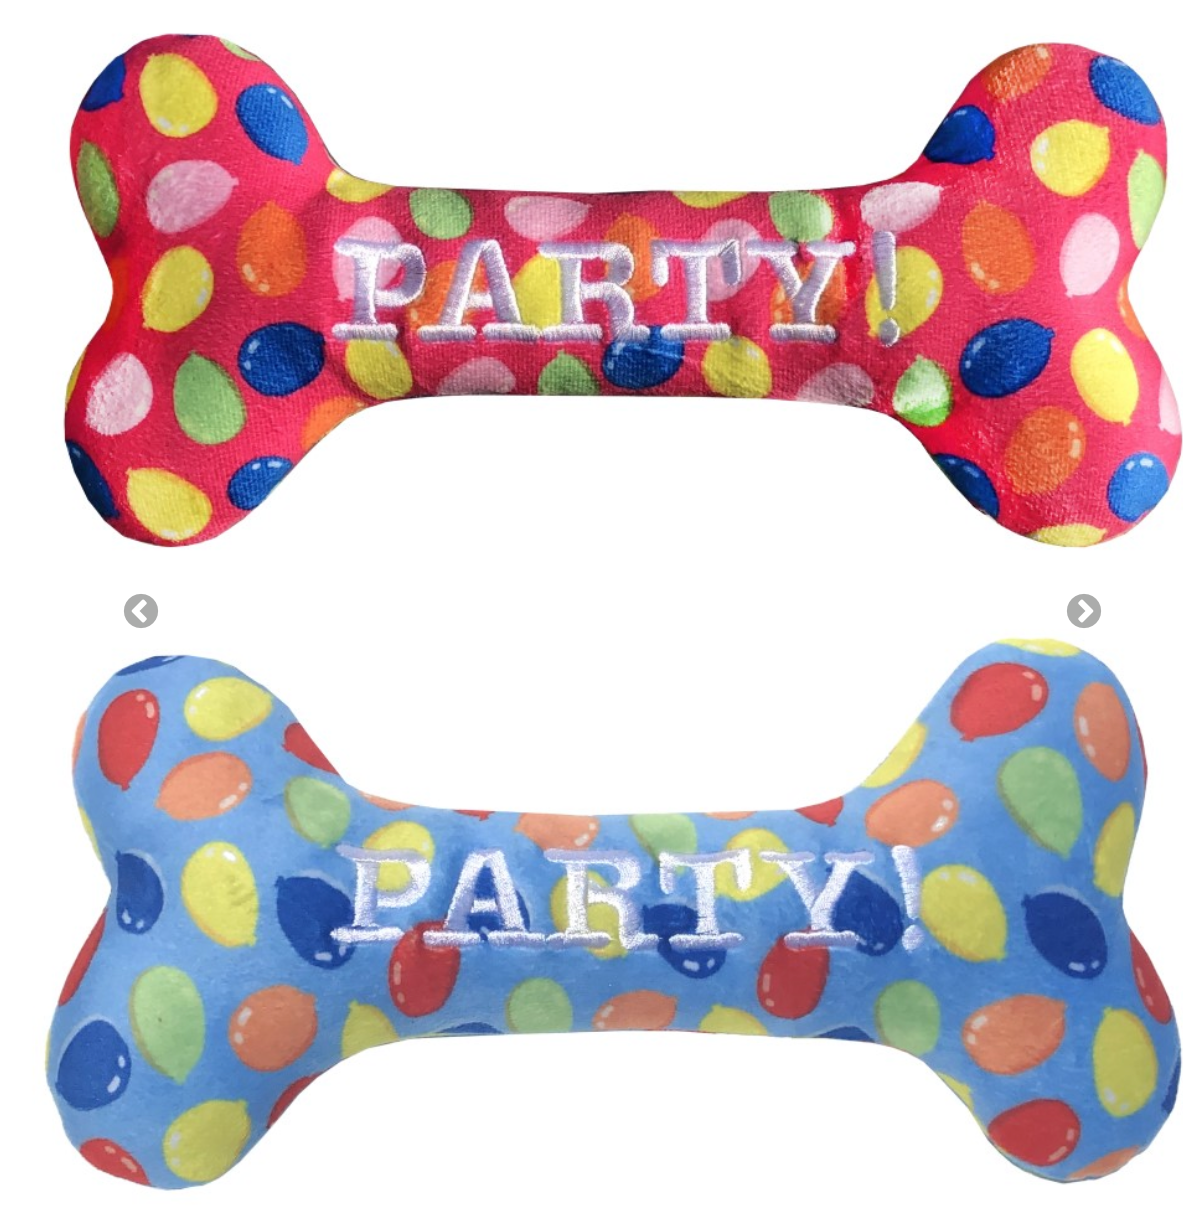 Party Time Bone Dog Toy